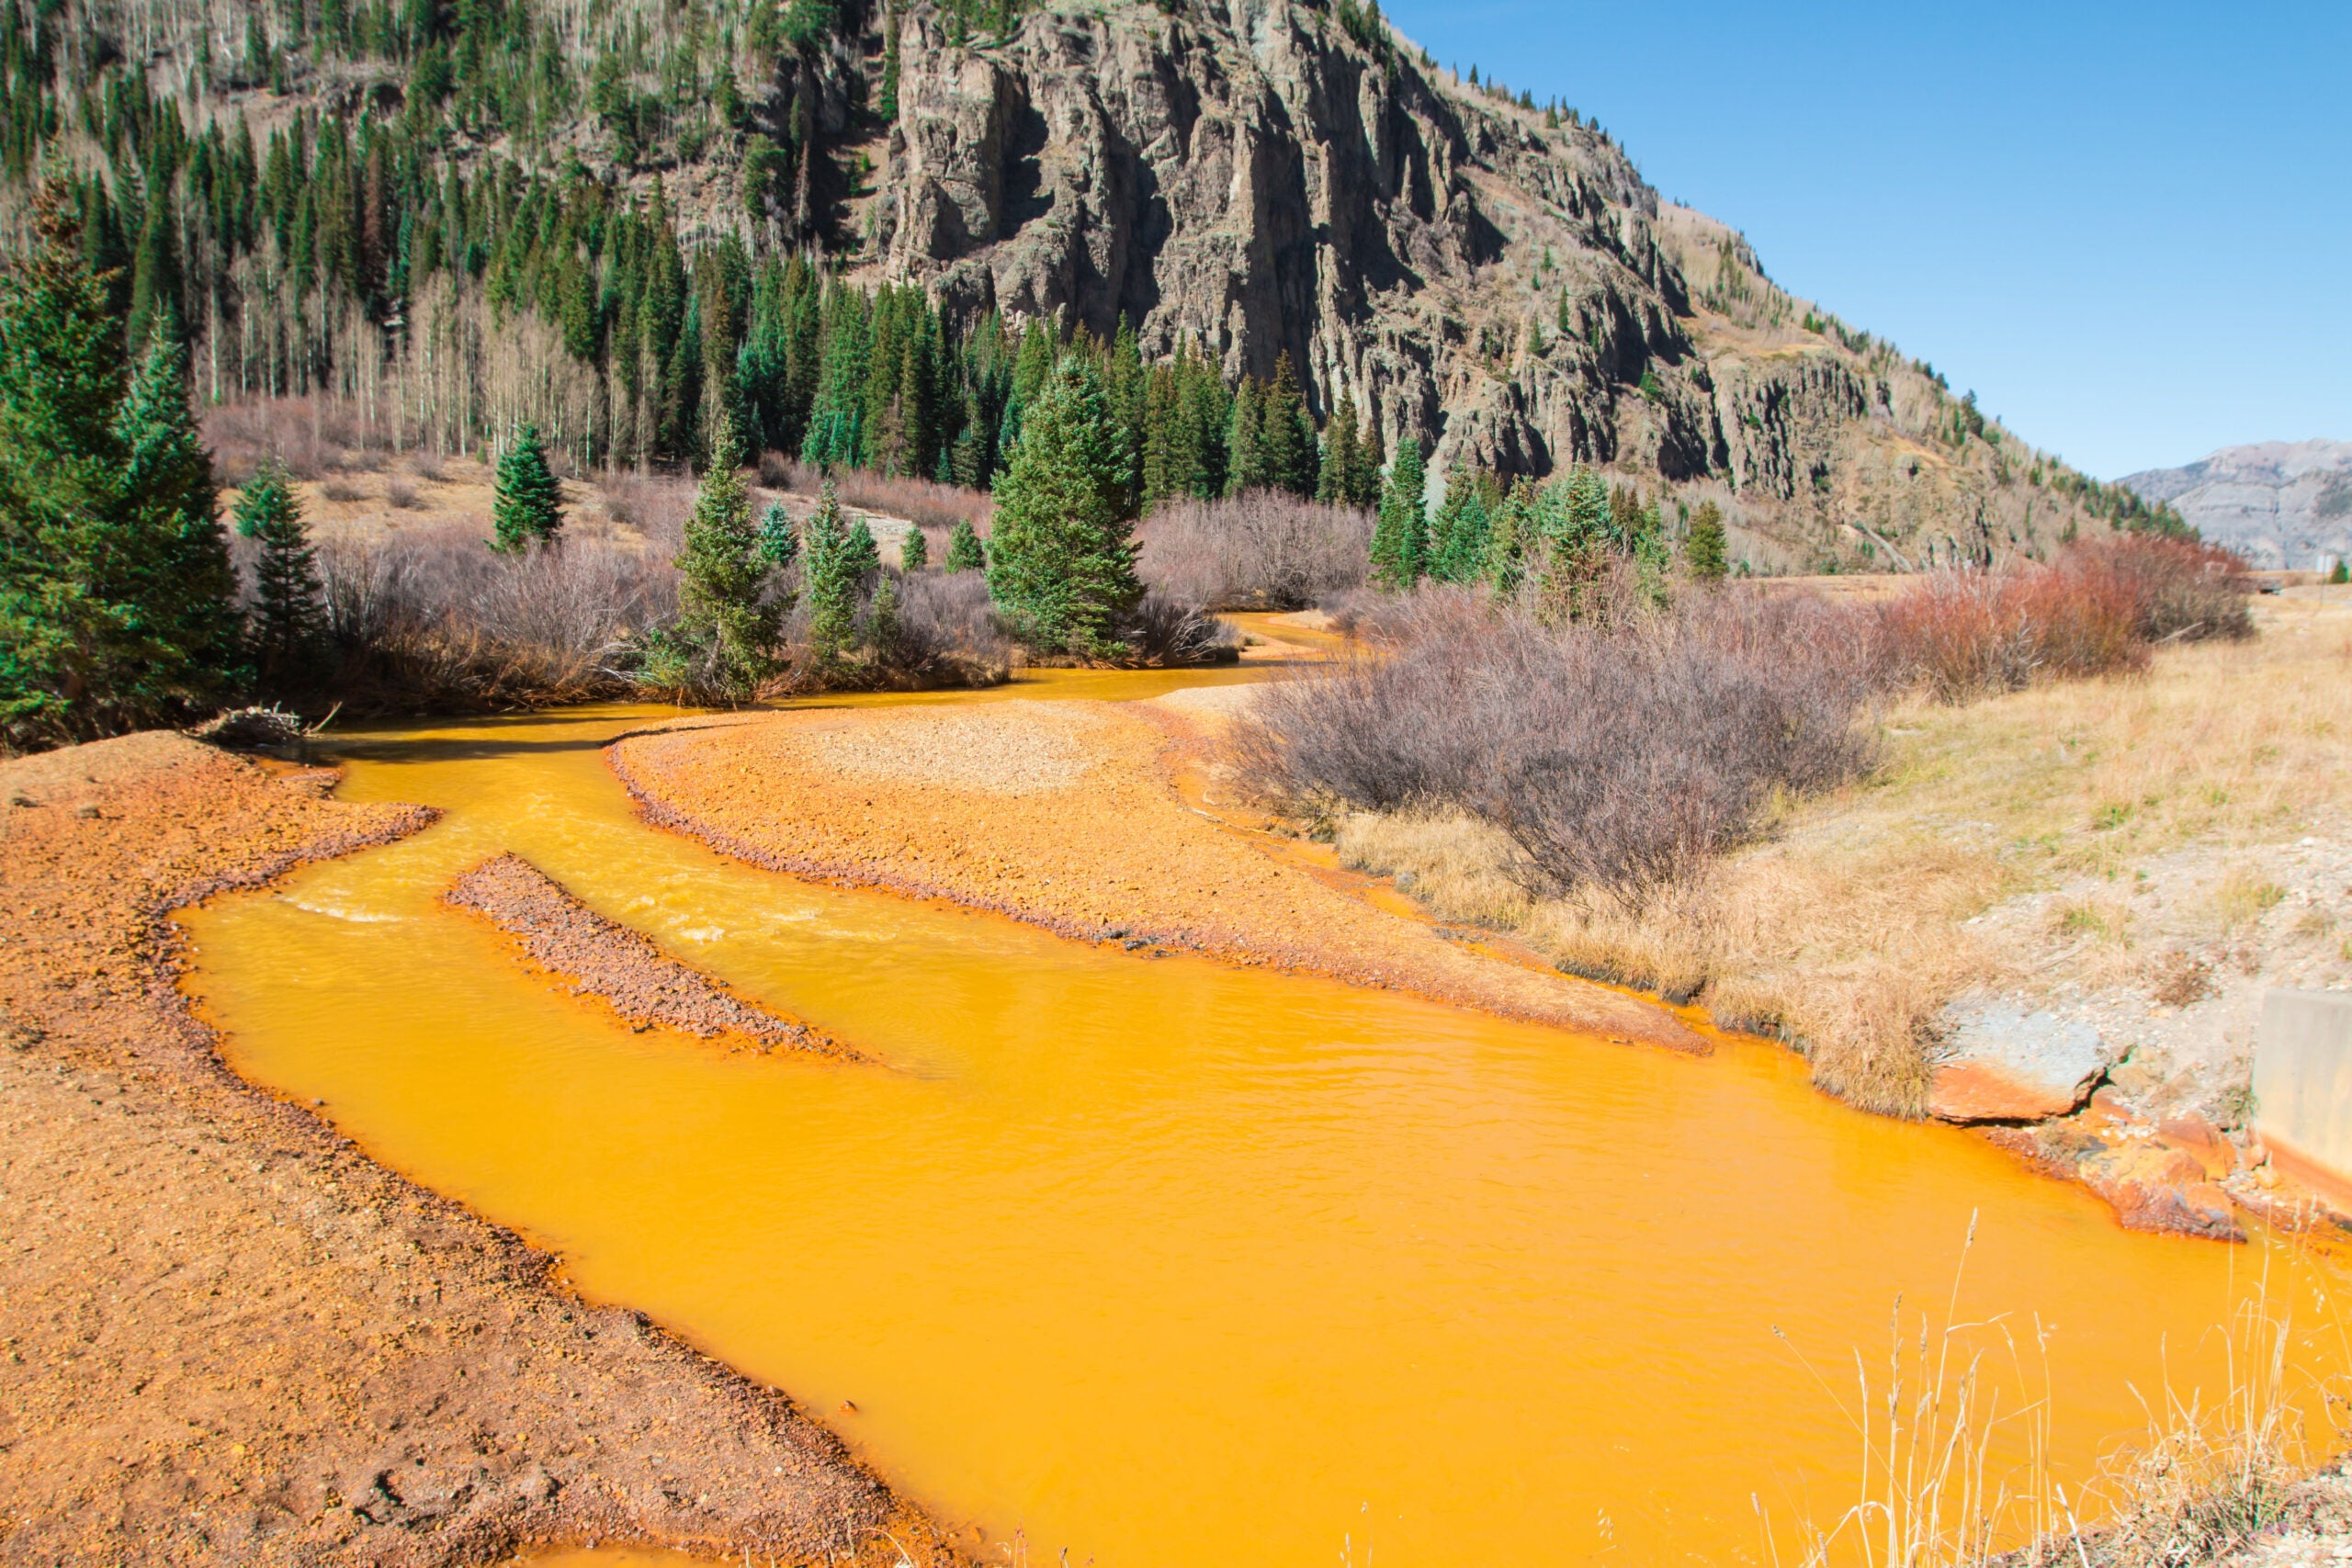 Toxic waste stains water yellow-orange near abandoned mines in Colorado.
(supitchamcsdam / Getty)